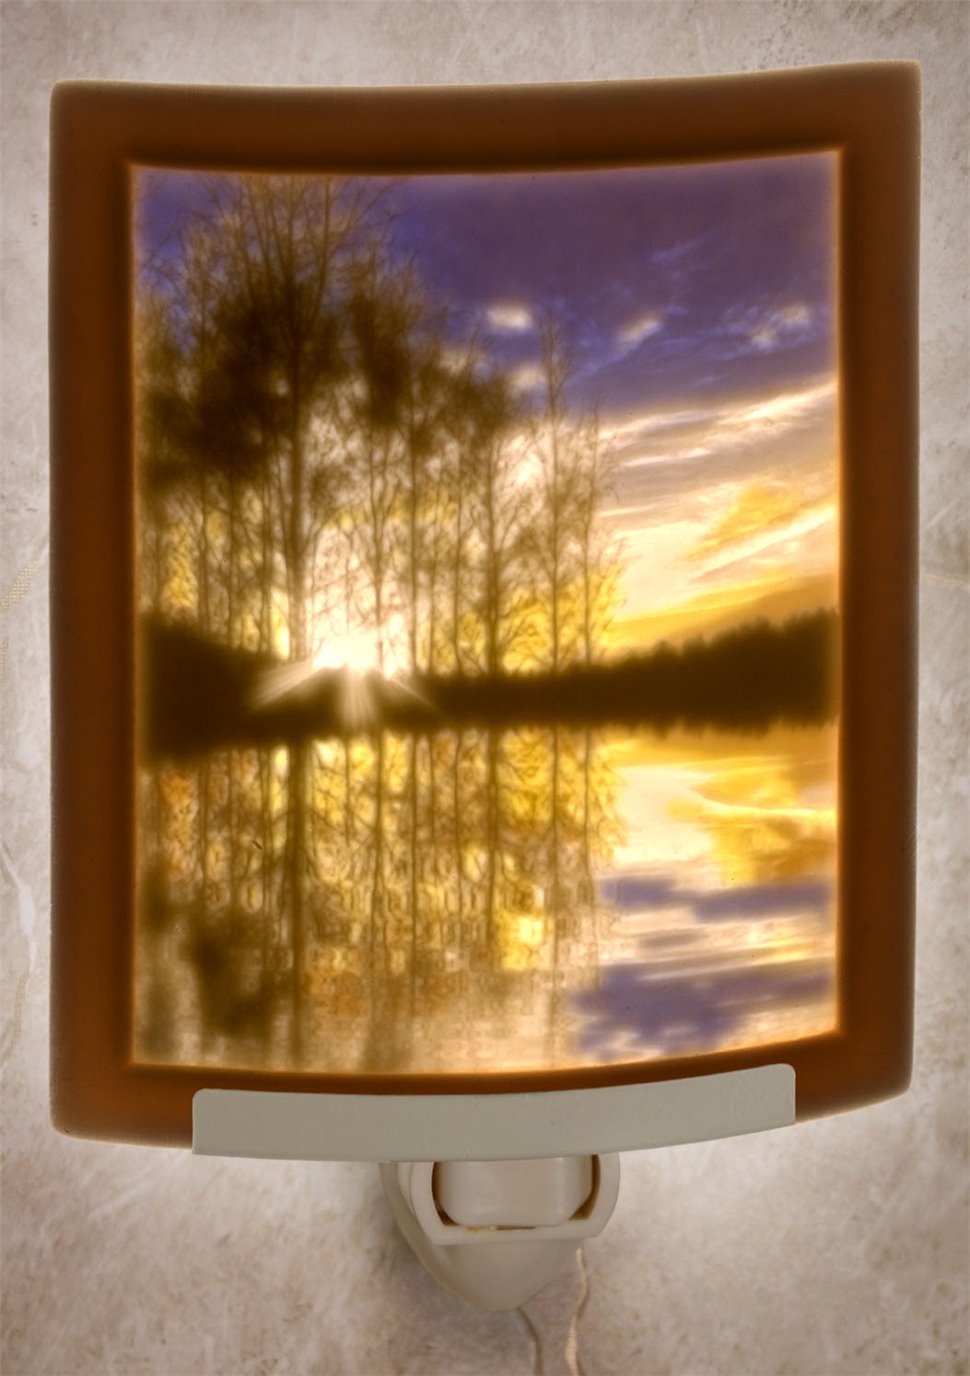 Colored Lakeshore Sunset Night Light by Porcelain Garden